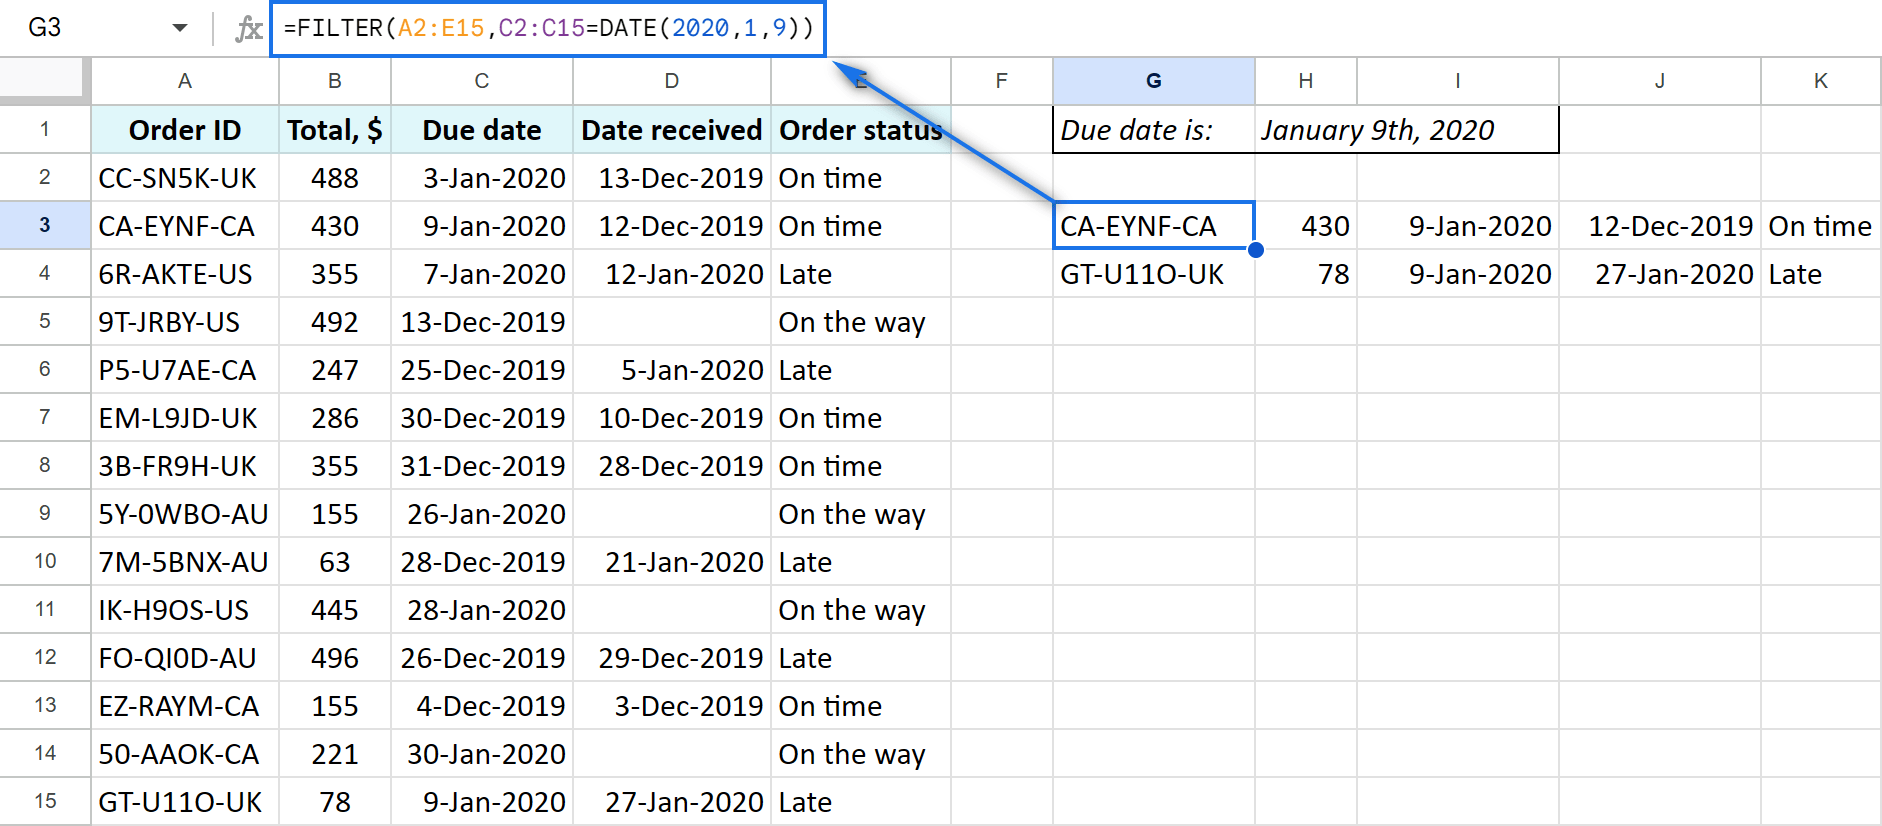 Google Sheets FILTER function with DATE function.